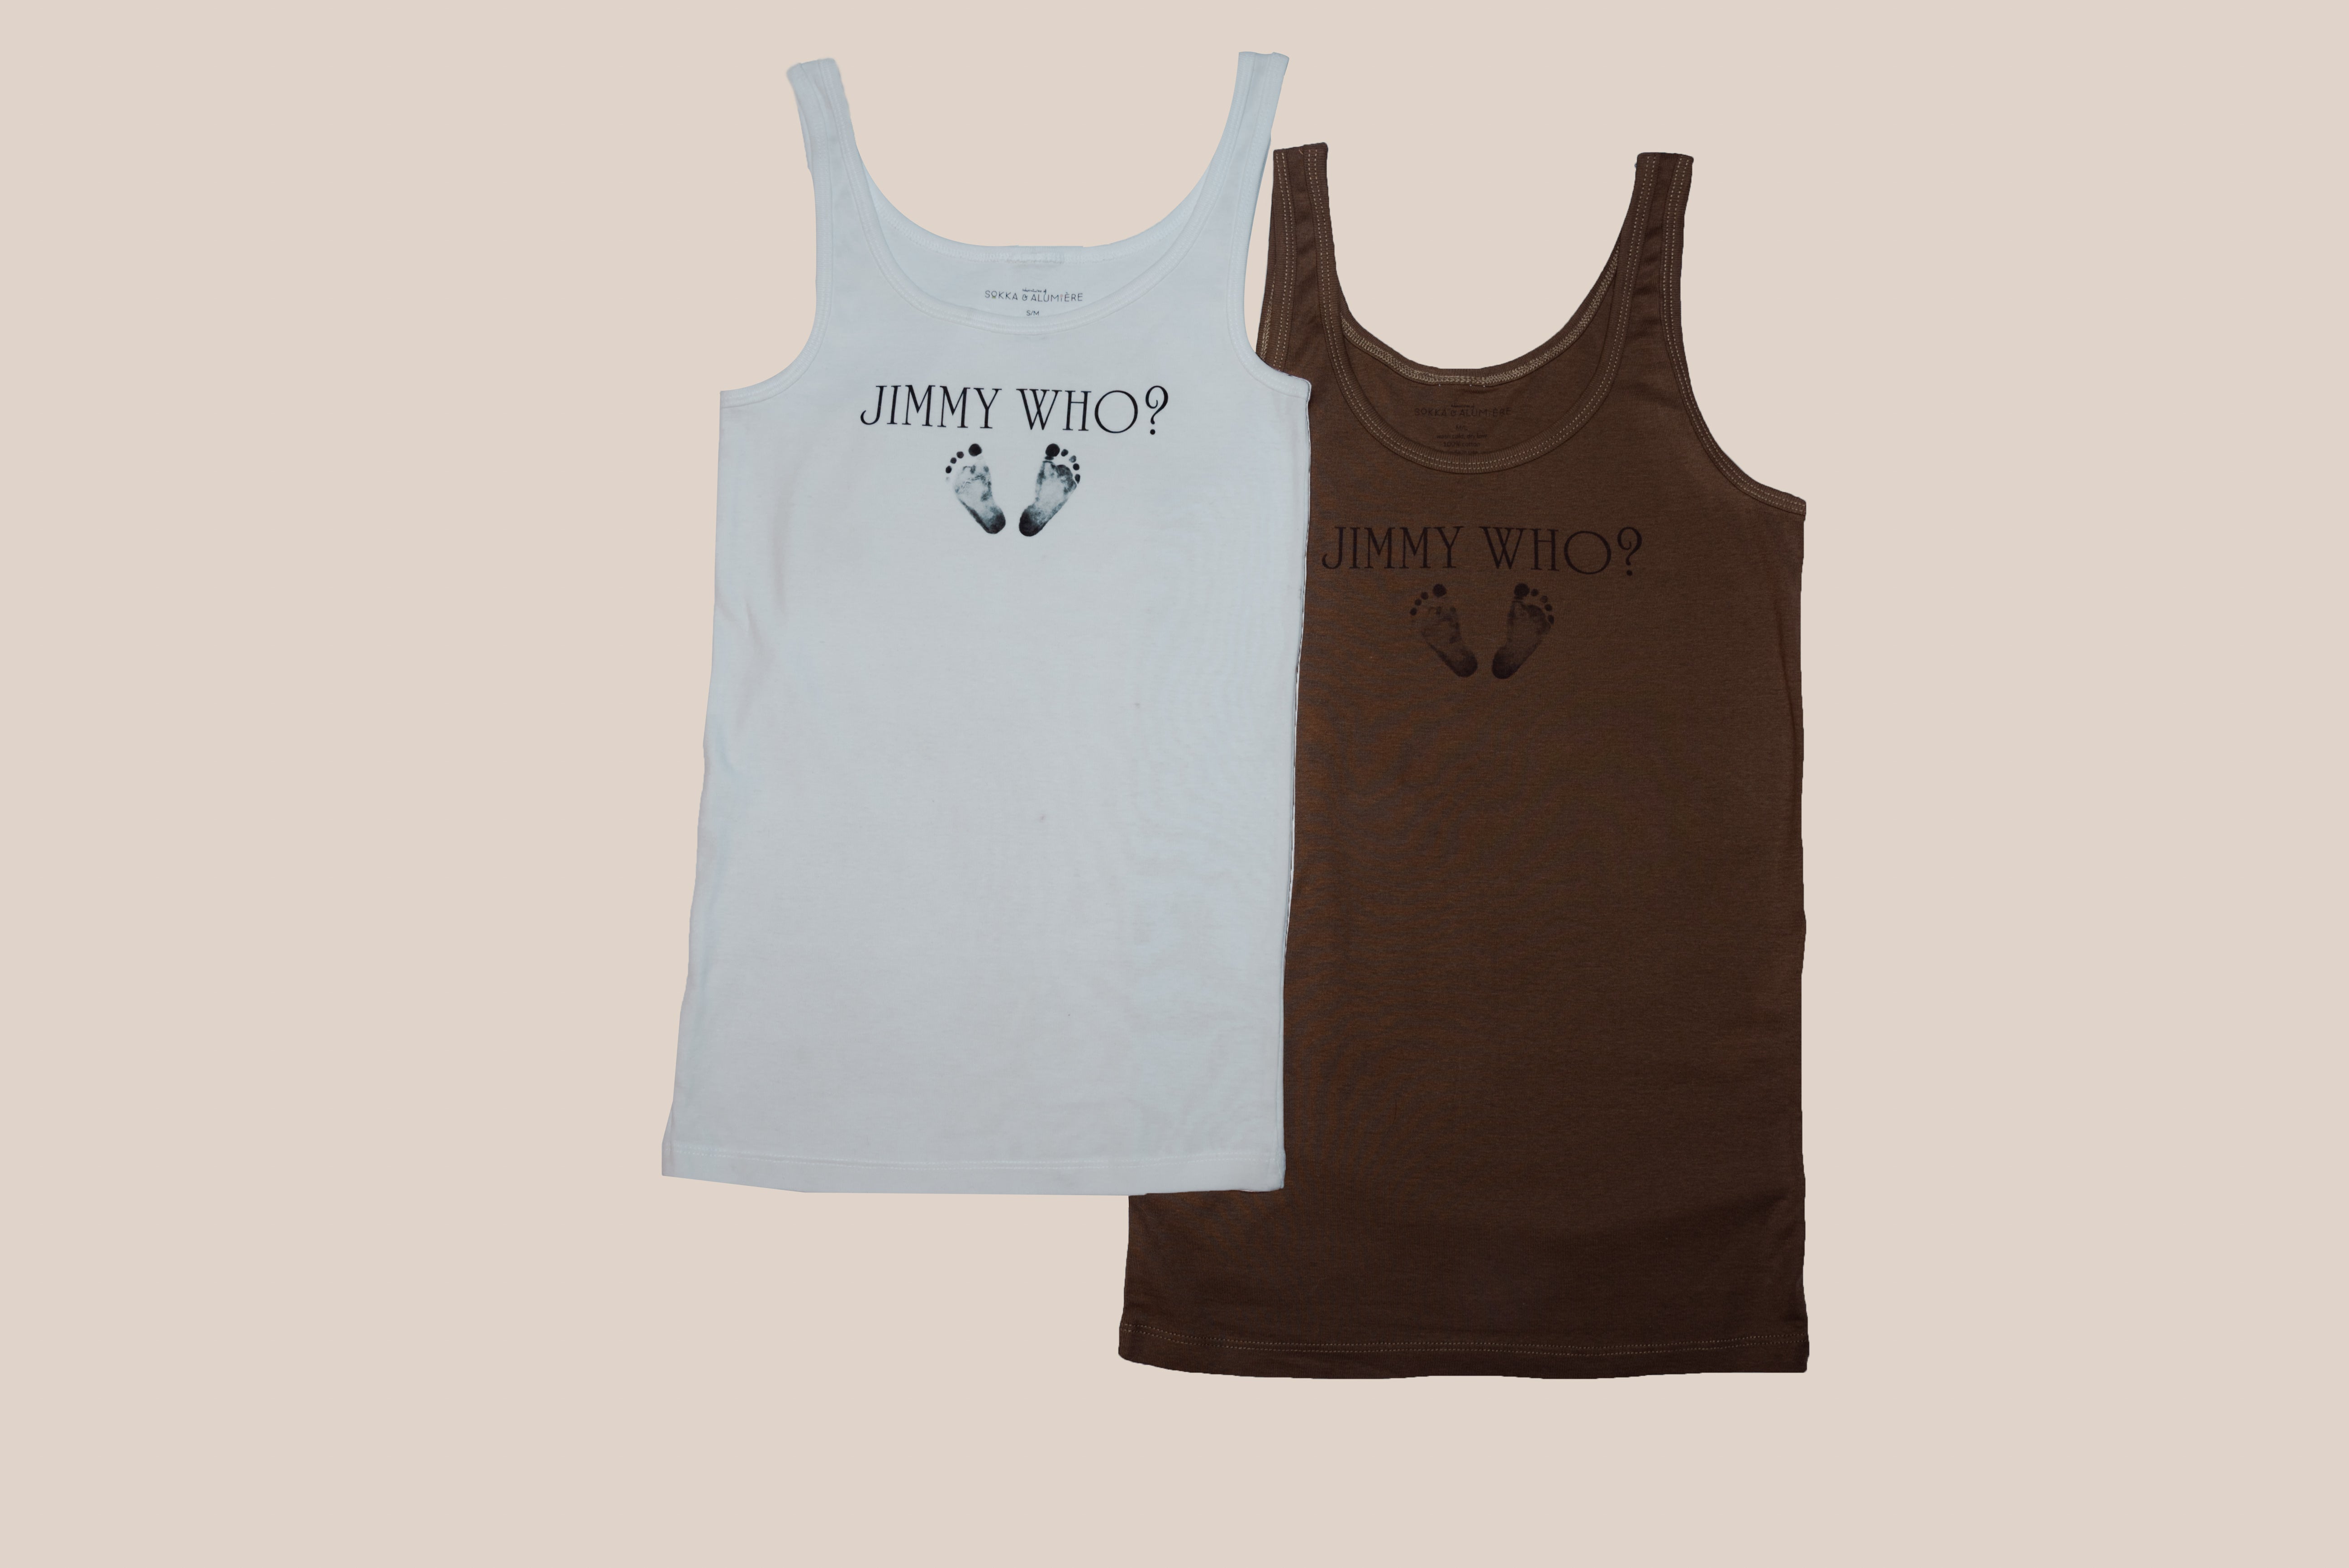 Jimmy Who? The Essentials Tank Top Styles